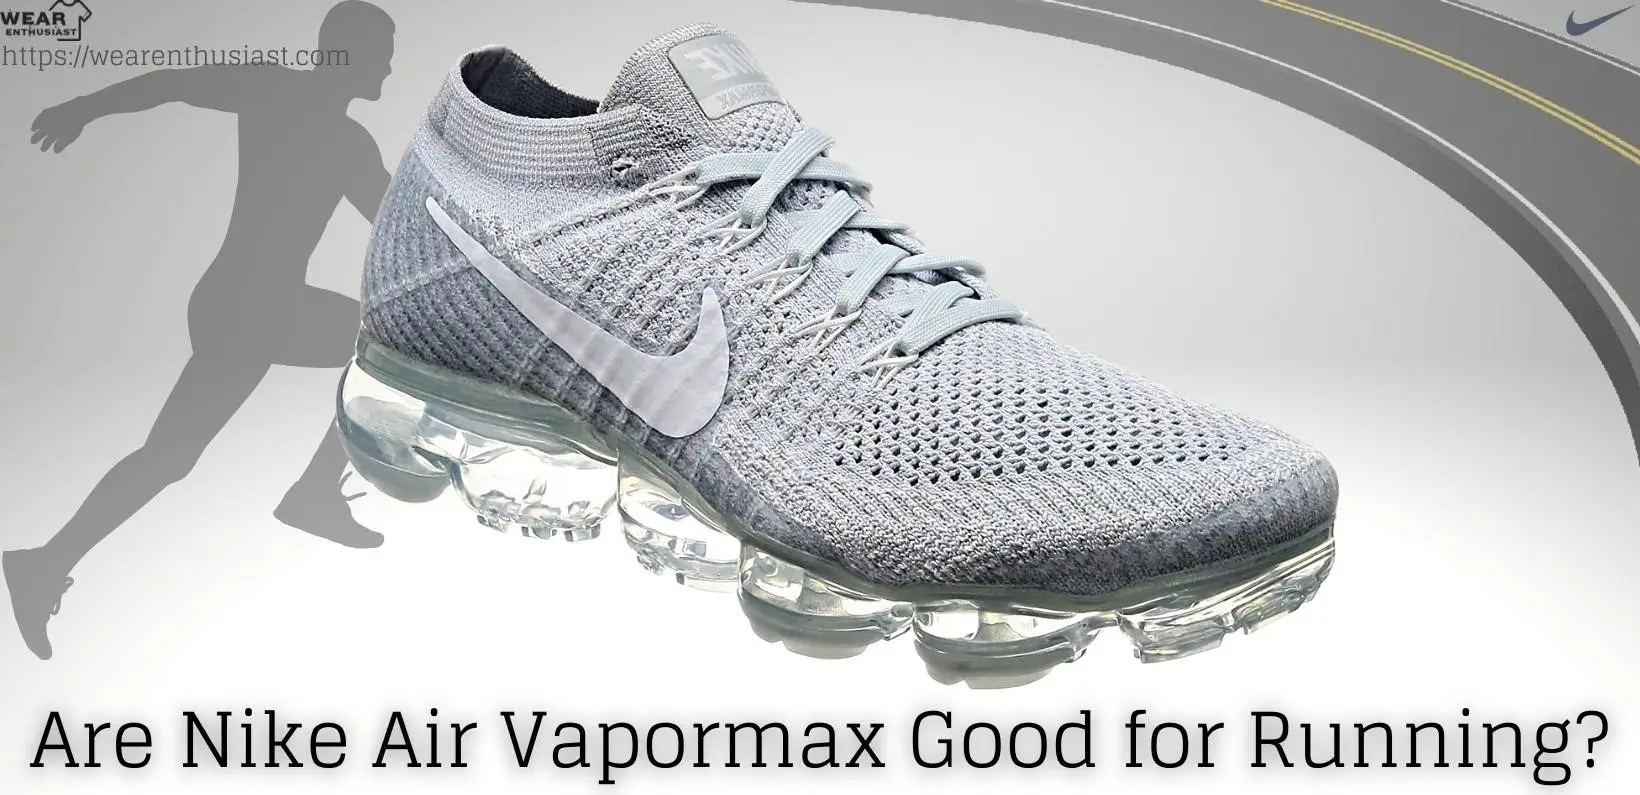 Are Vapormax good for running?